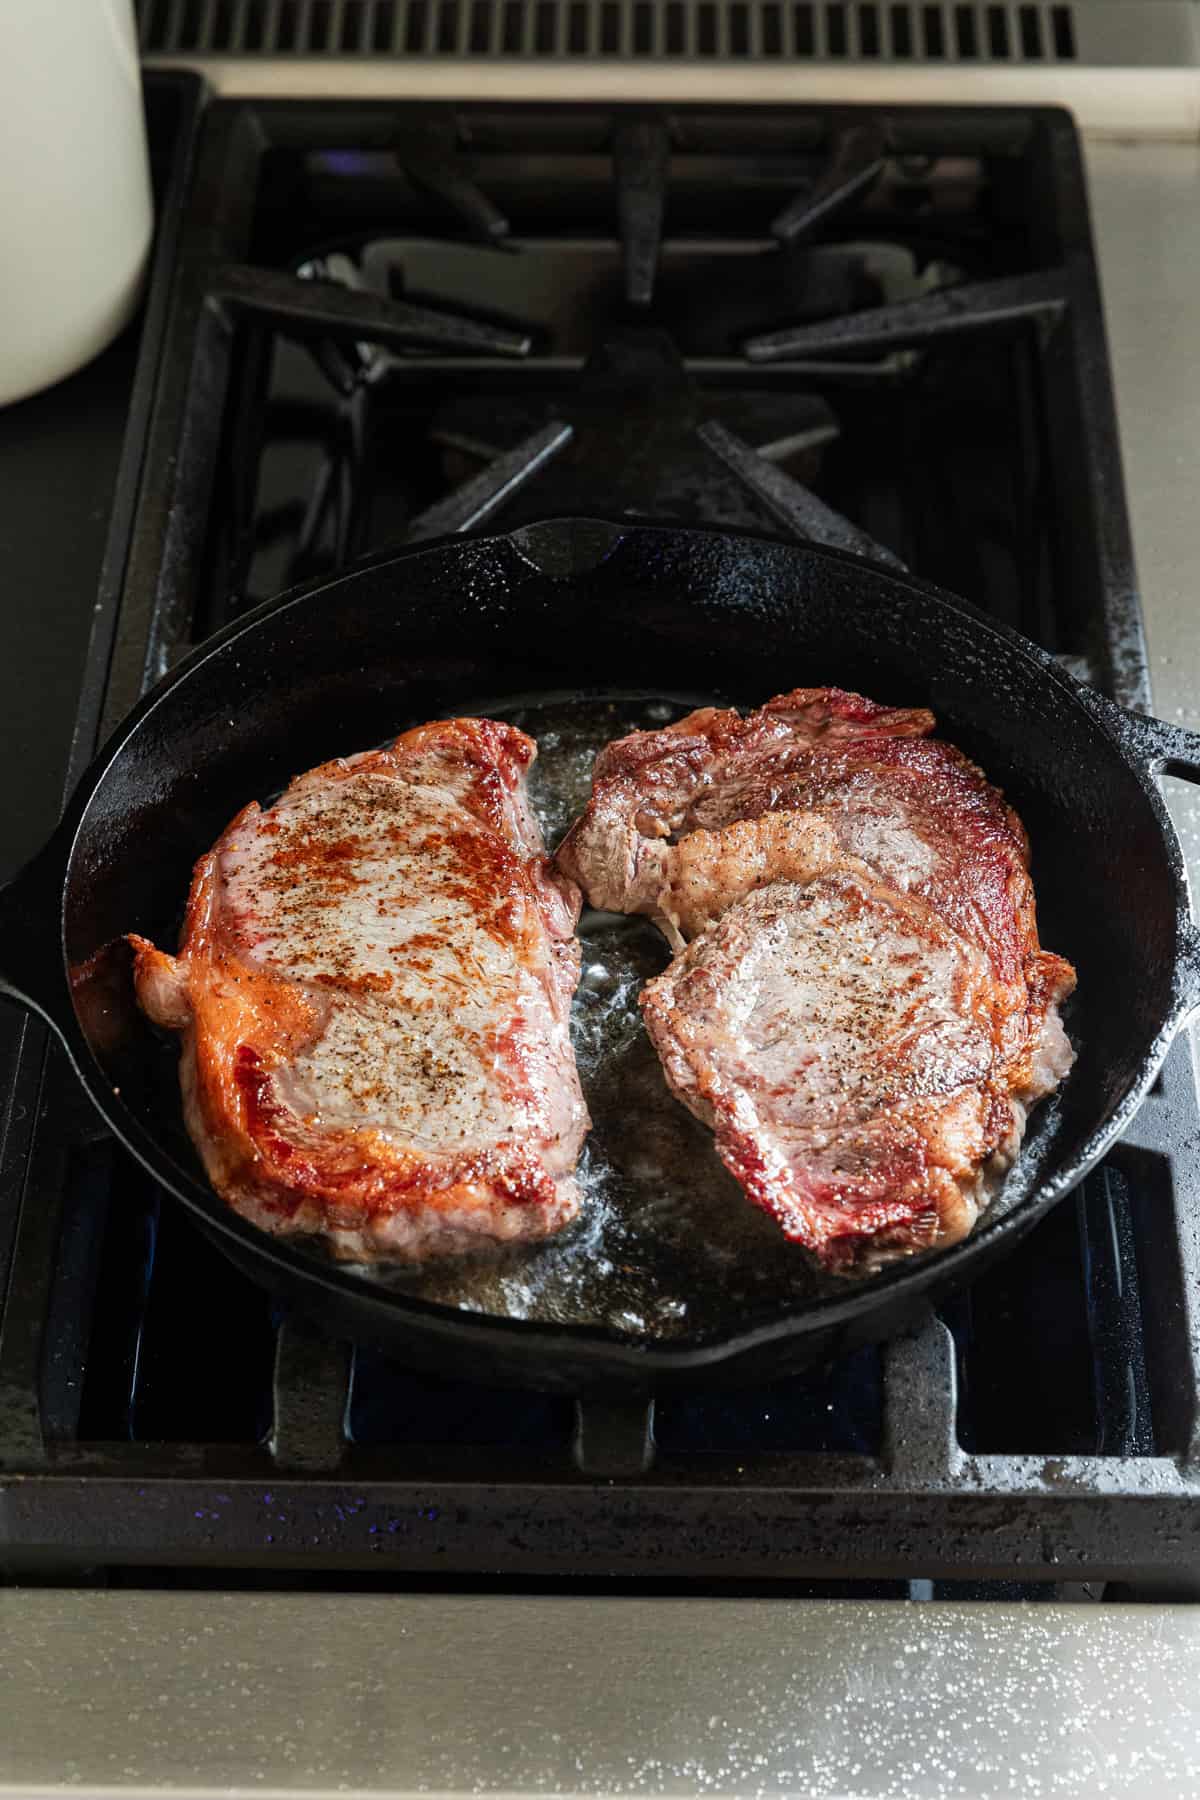 Cooking the other side of the steaks in a cast iron skillet.